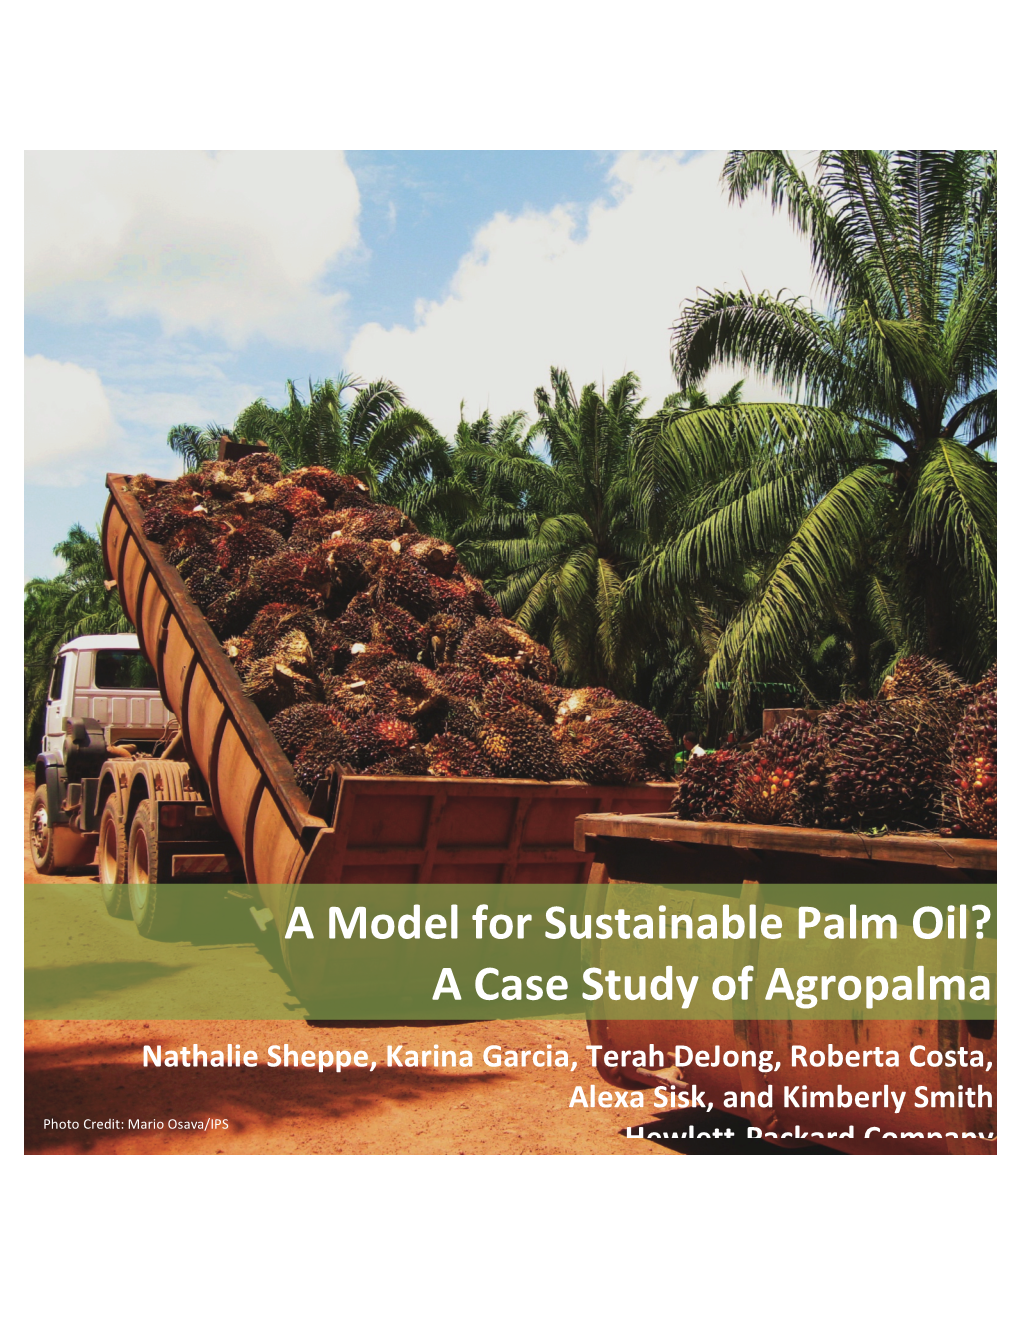 A Model for Sustainable Palm Oil? a Case Study of Agropalma